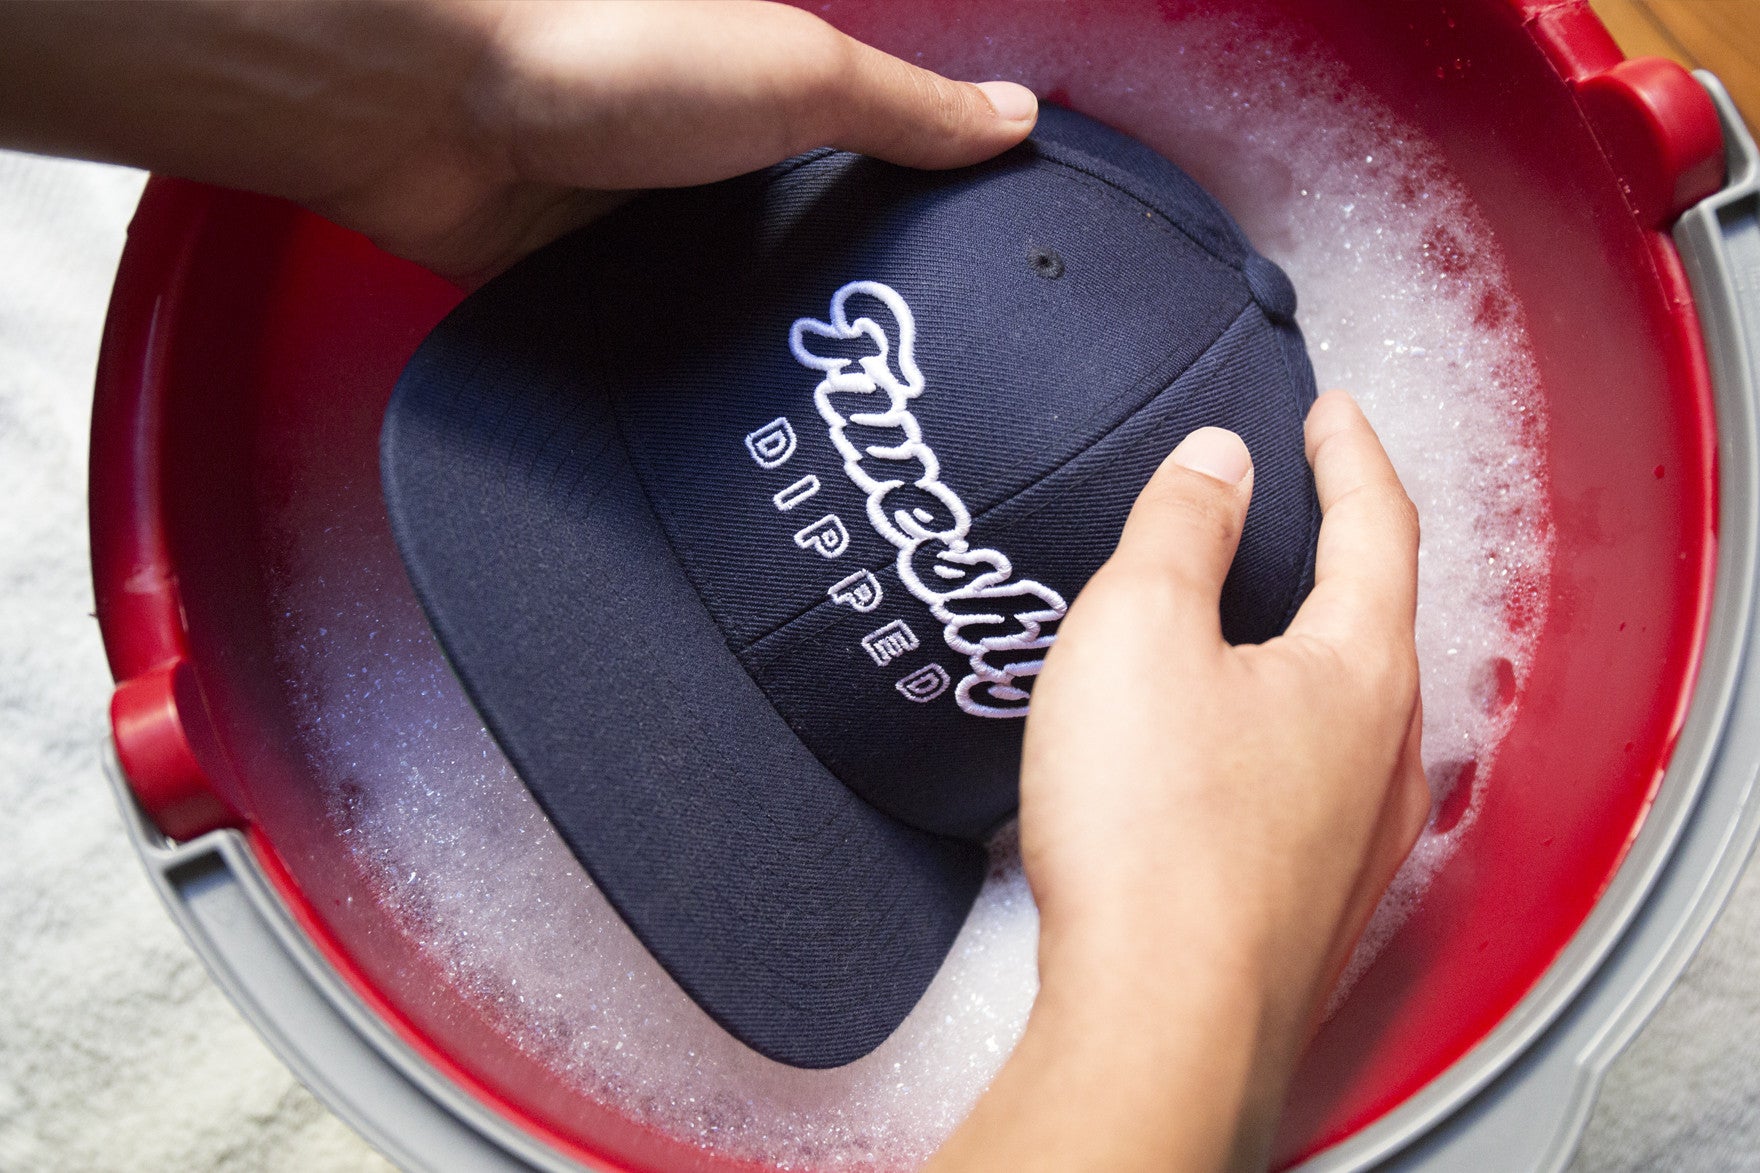 FWESHLY INFORMATIONAL: How to Easily Clean/ Wash Your Snapback